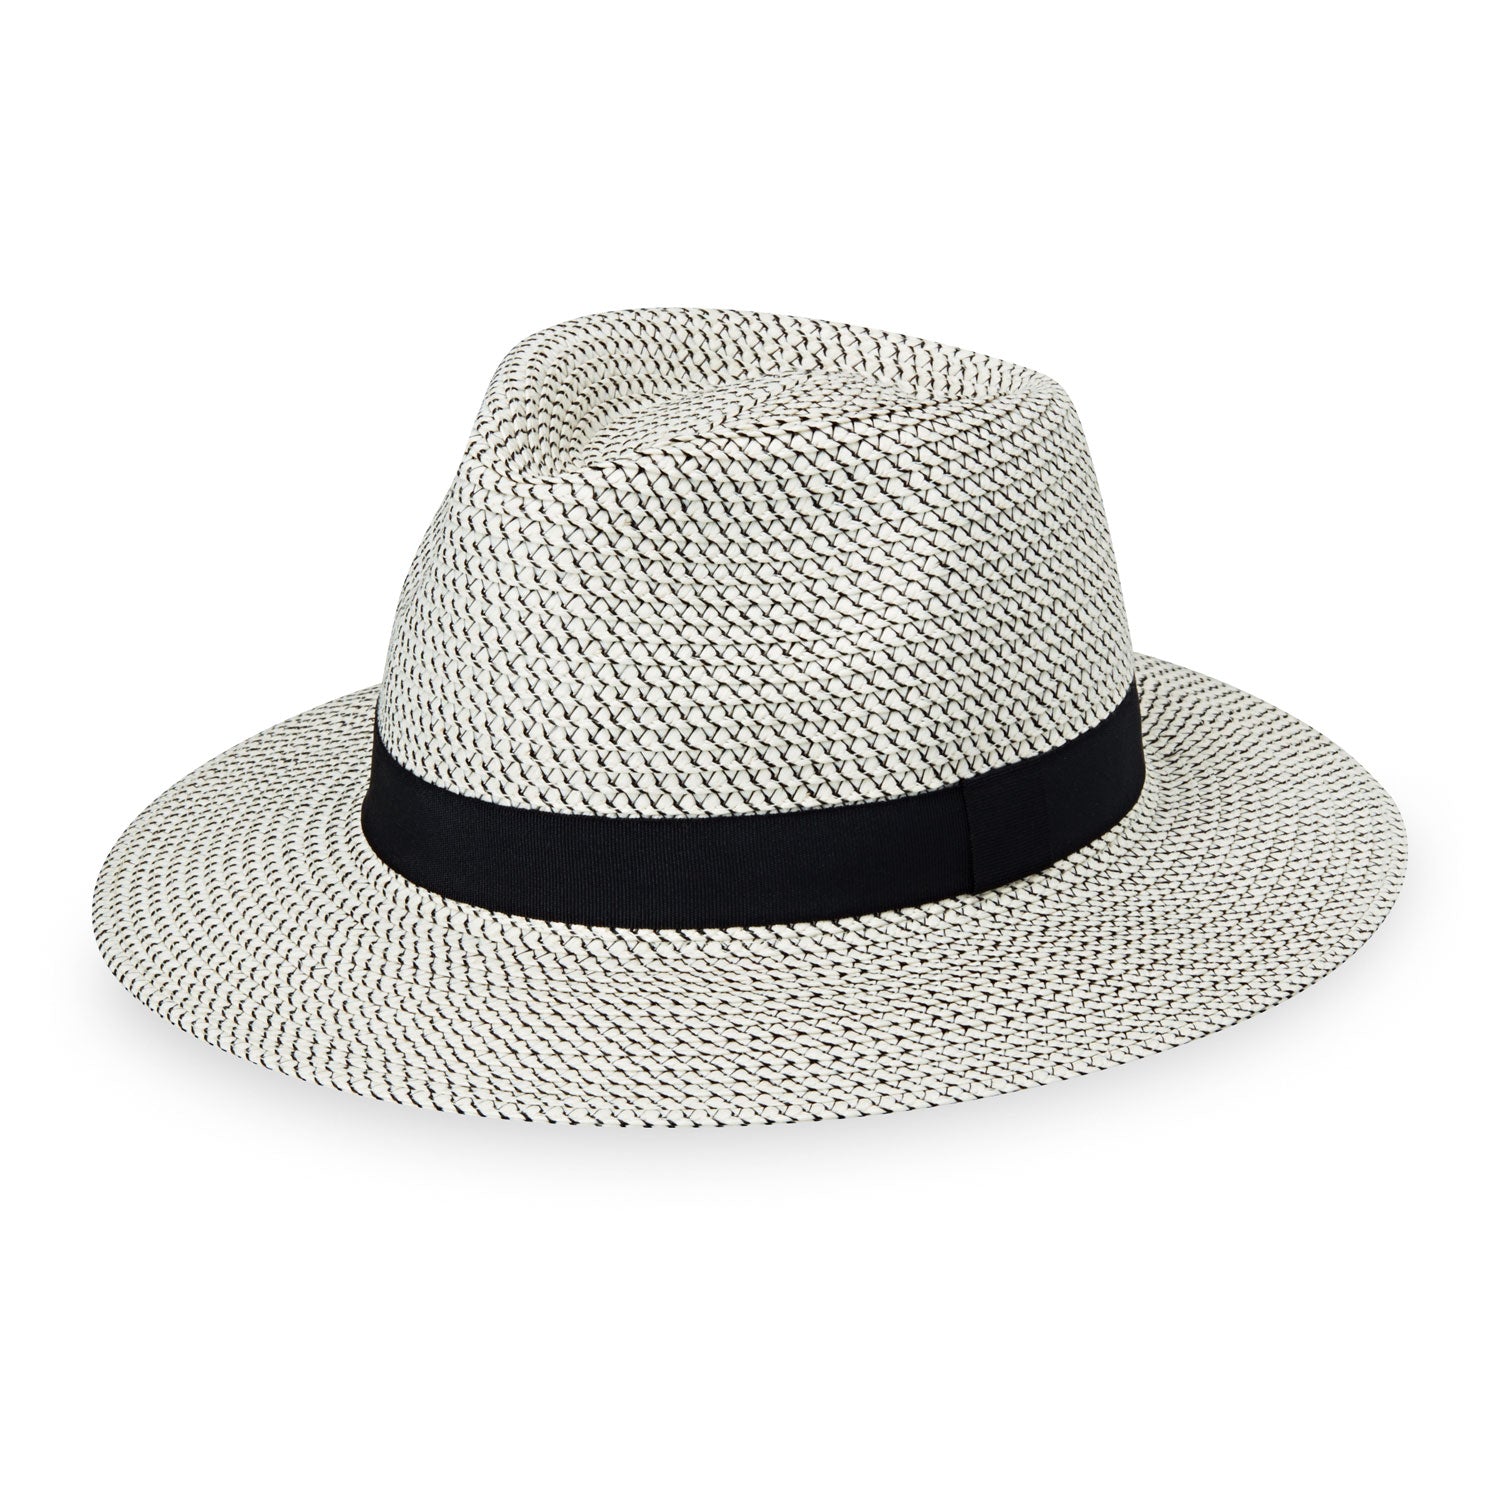 Featuring Front of Women's Packable Fedora Style Petite Charlie UPF Sun Hat in Ivory Black from Wallaroo